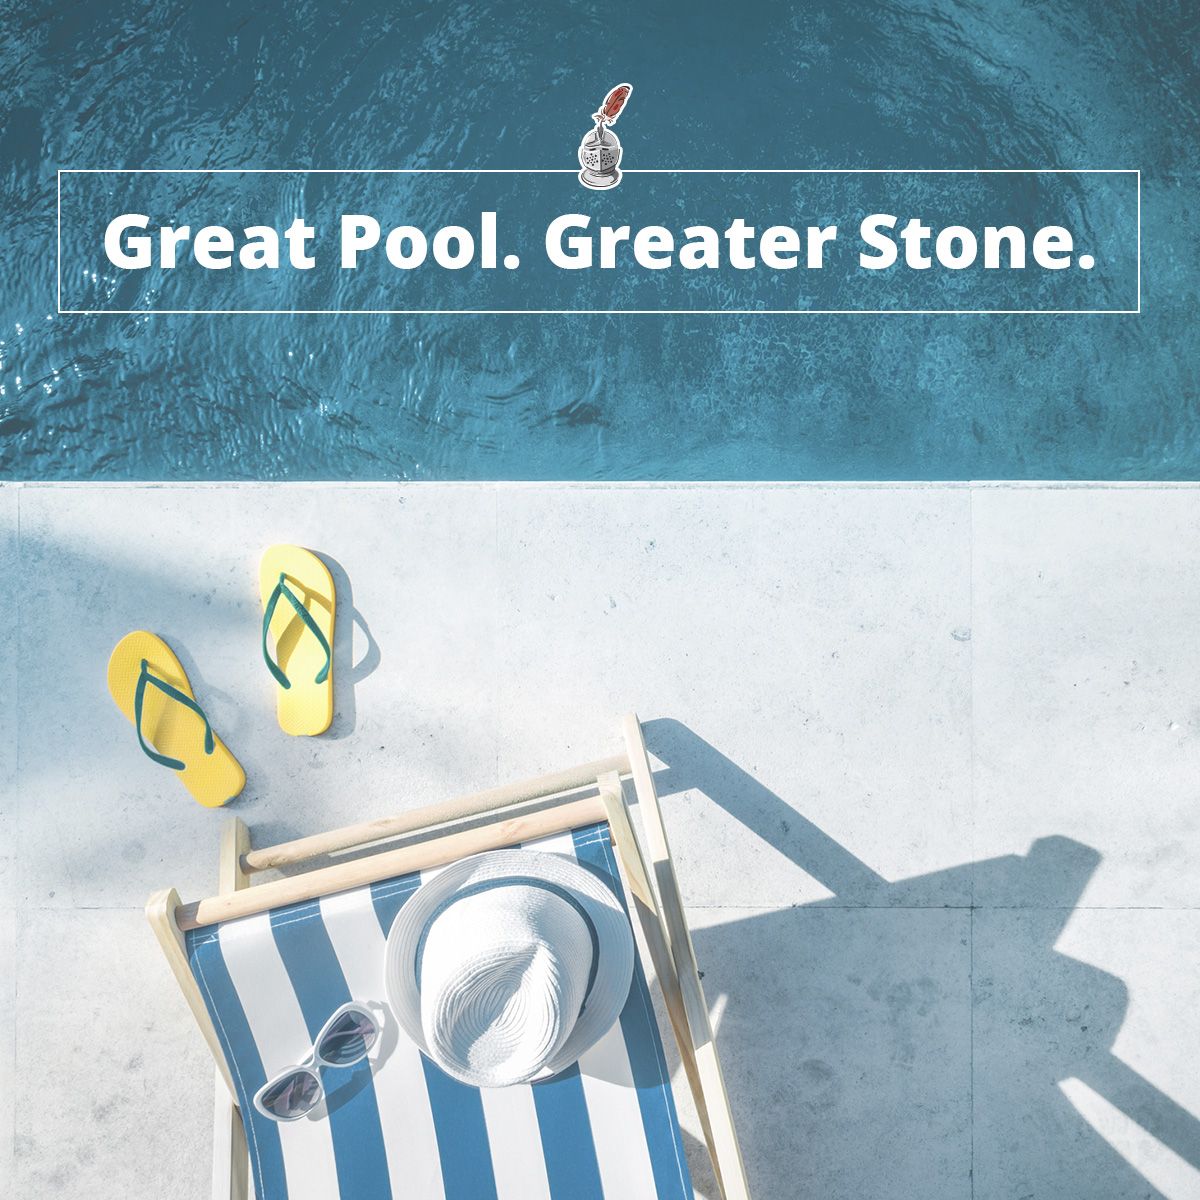 Great Pool. Greater Stone.